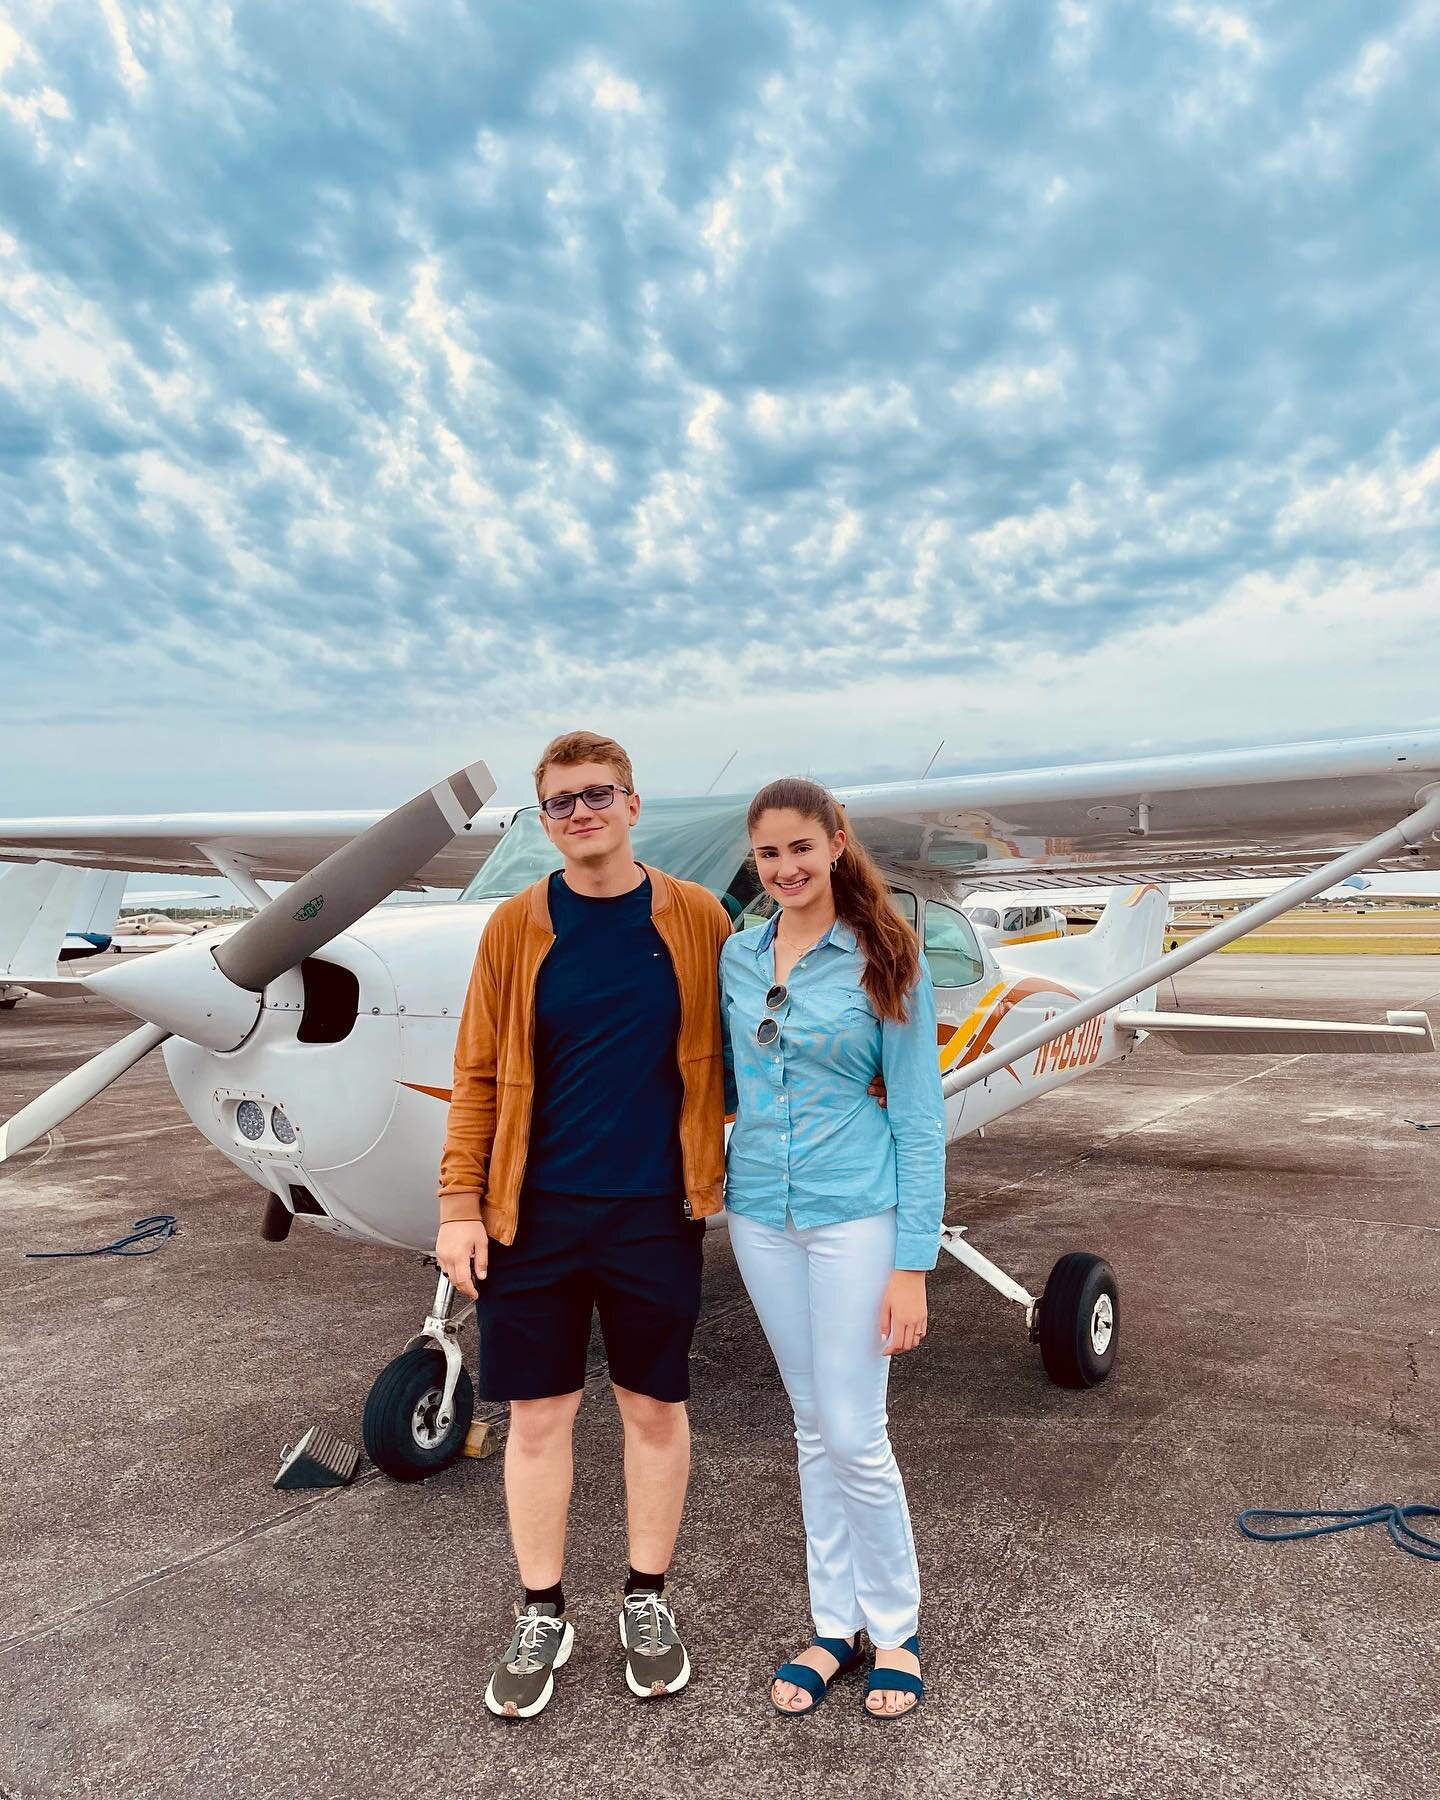 Date flight ✨✈️ Come take your loved ones on a private flight! 💕
.
.
.
#miami #mia #beach #fll #florida #soflo #visitus #travelblogger #travel #explore #love #happy #date #datenight #dateideas #planeride #privateflight #flying #flywithus #tour #tour